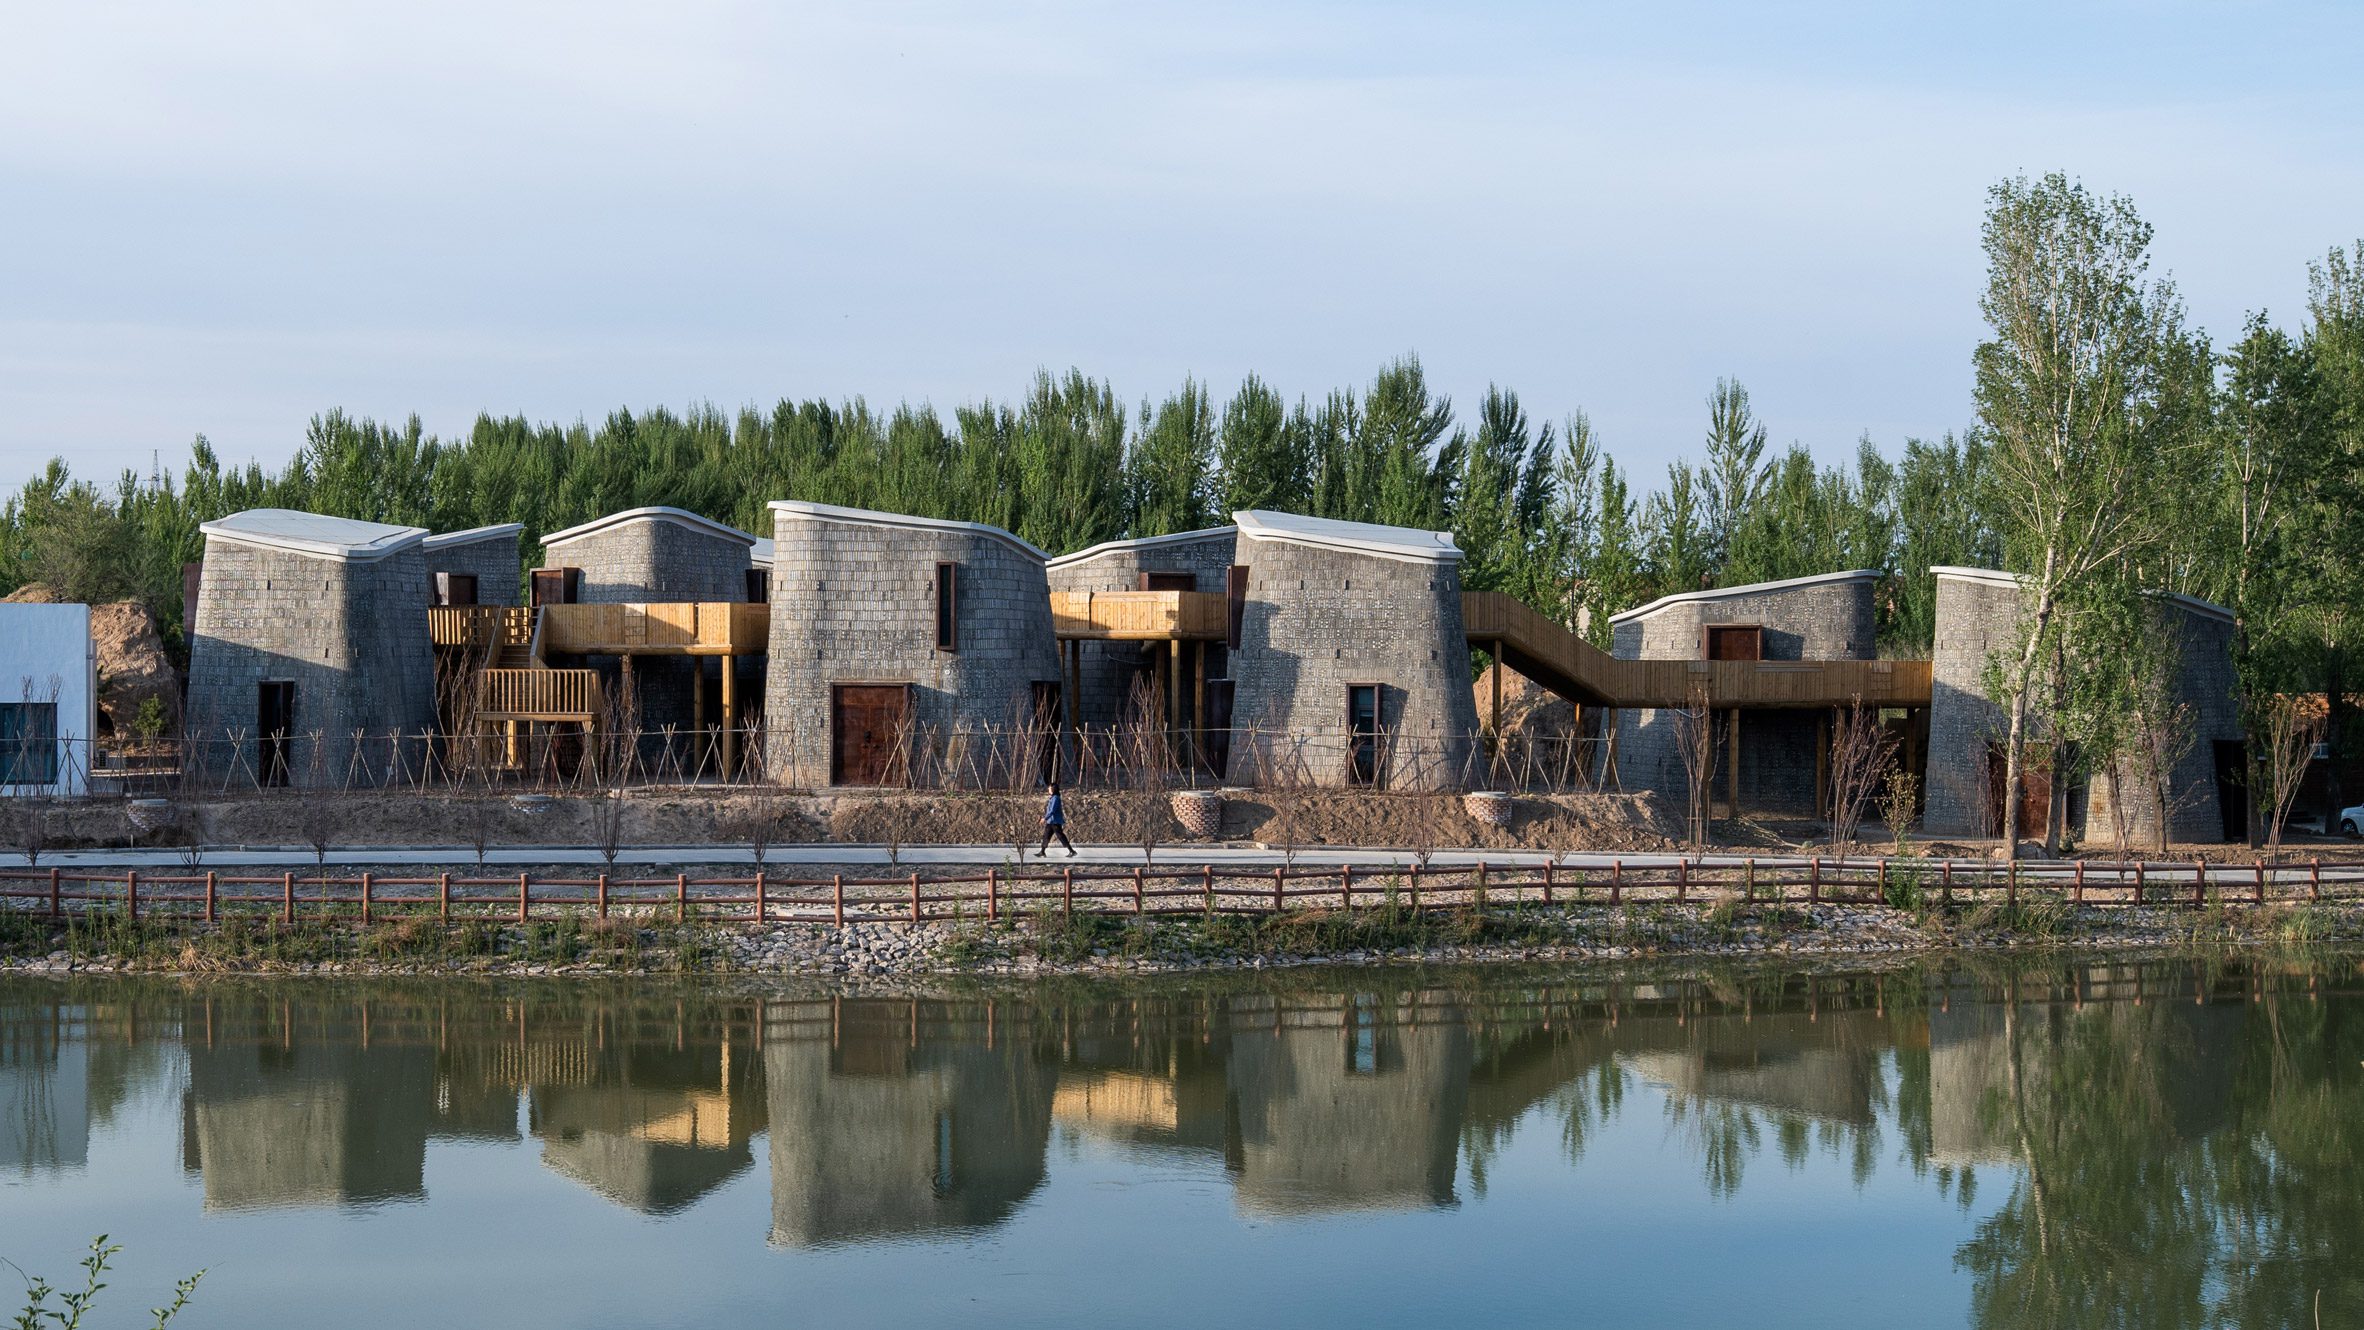 Brick-clad pods connected by wooden walkway in Grotto Retreat Xiyaotou